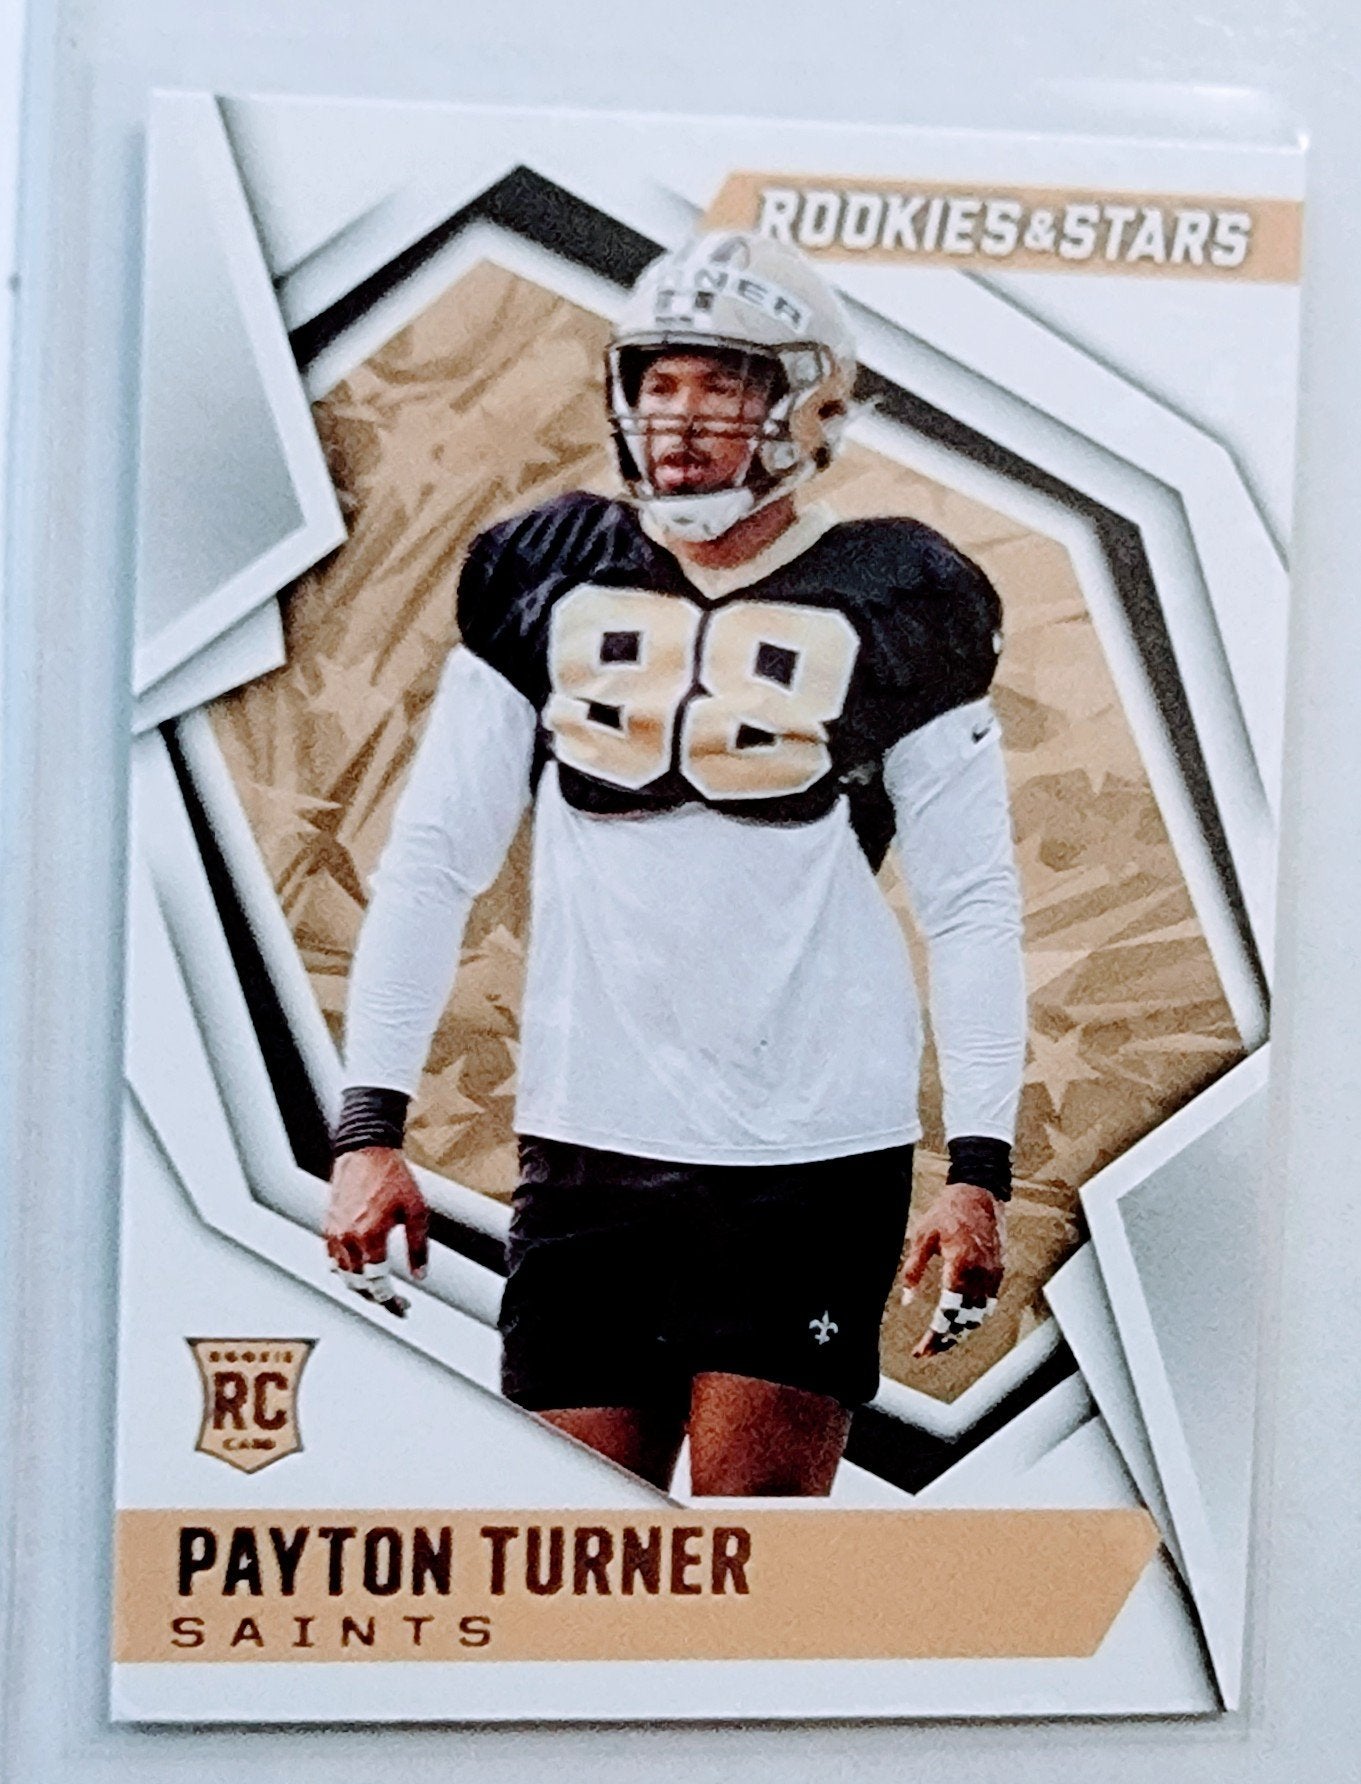 2021 Panini Rookies and Stars Payton Turner Rookie Football Card AVM1 simple Xclusive Collectibles   